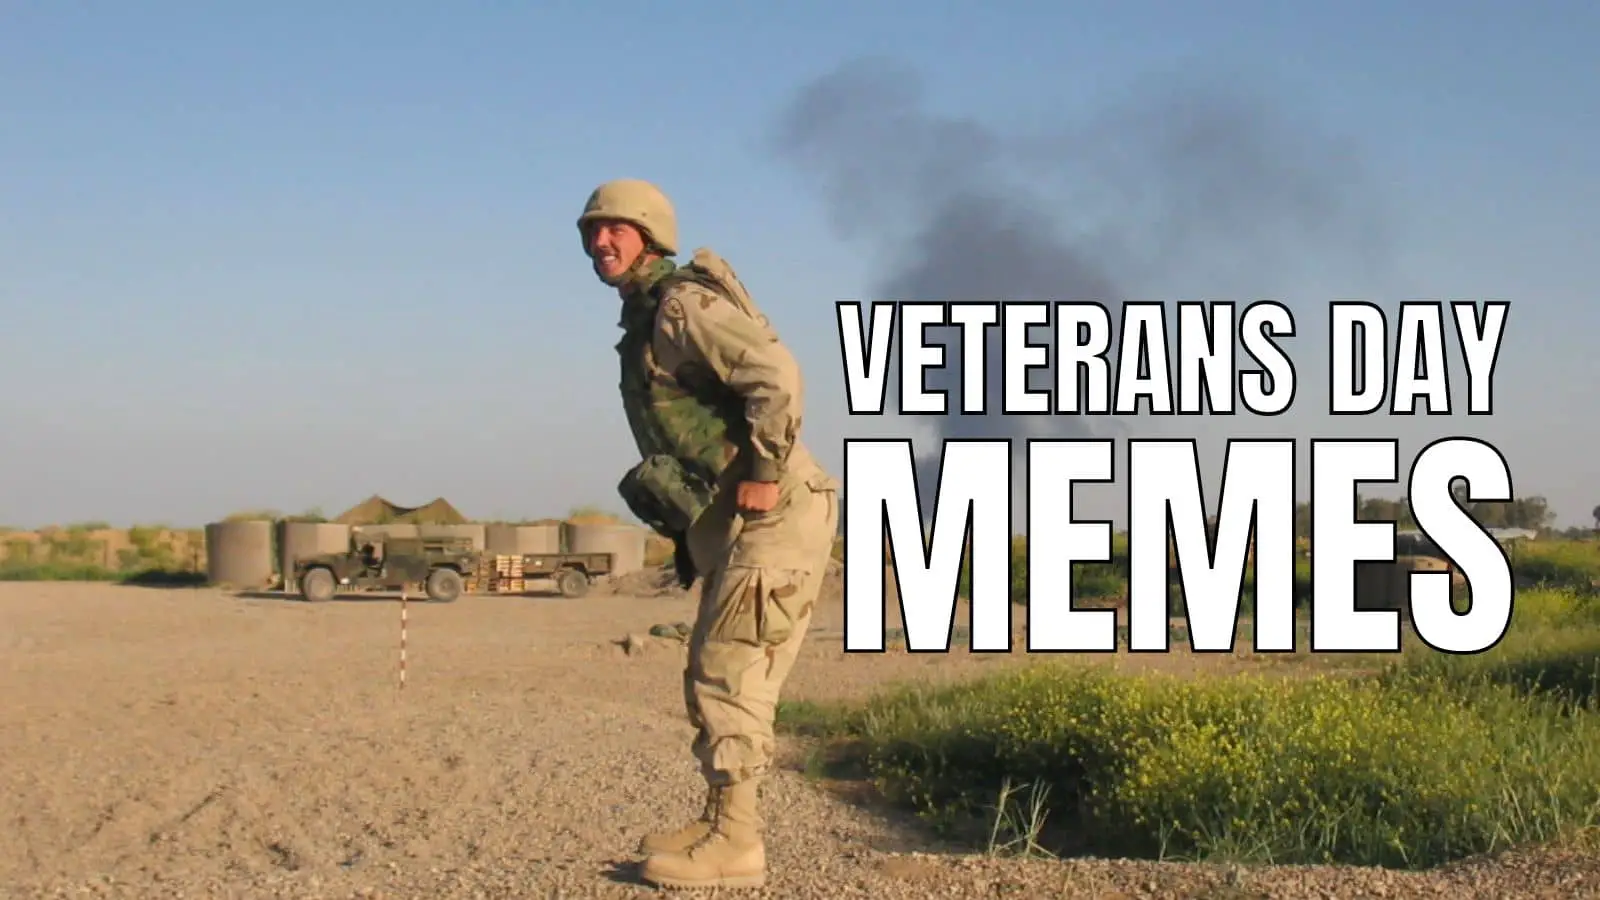 20 Best Veterans Day Memes To Share In 2022 - HumorNama